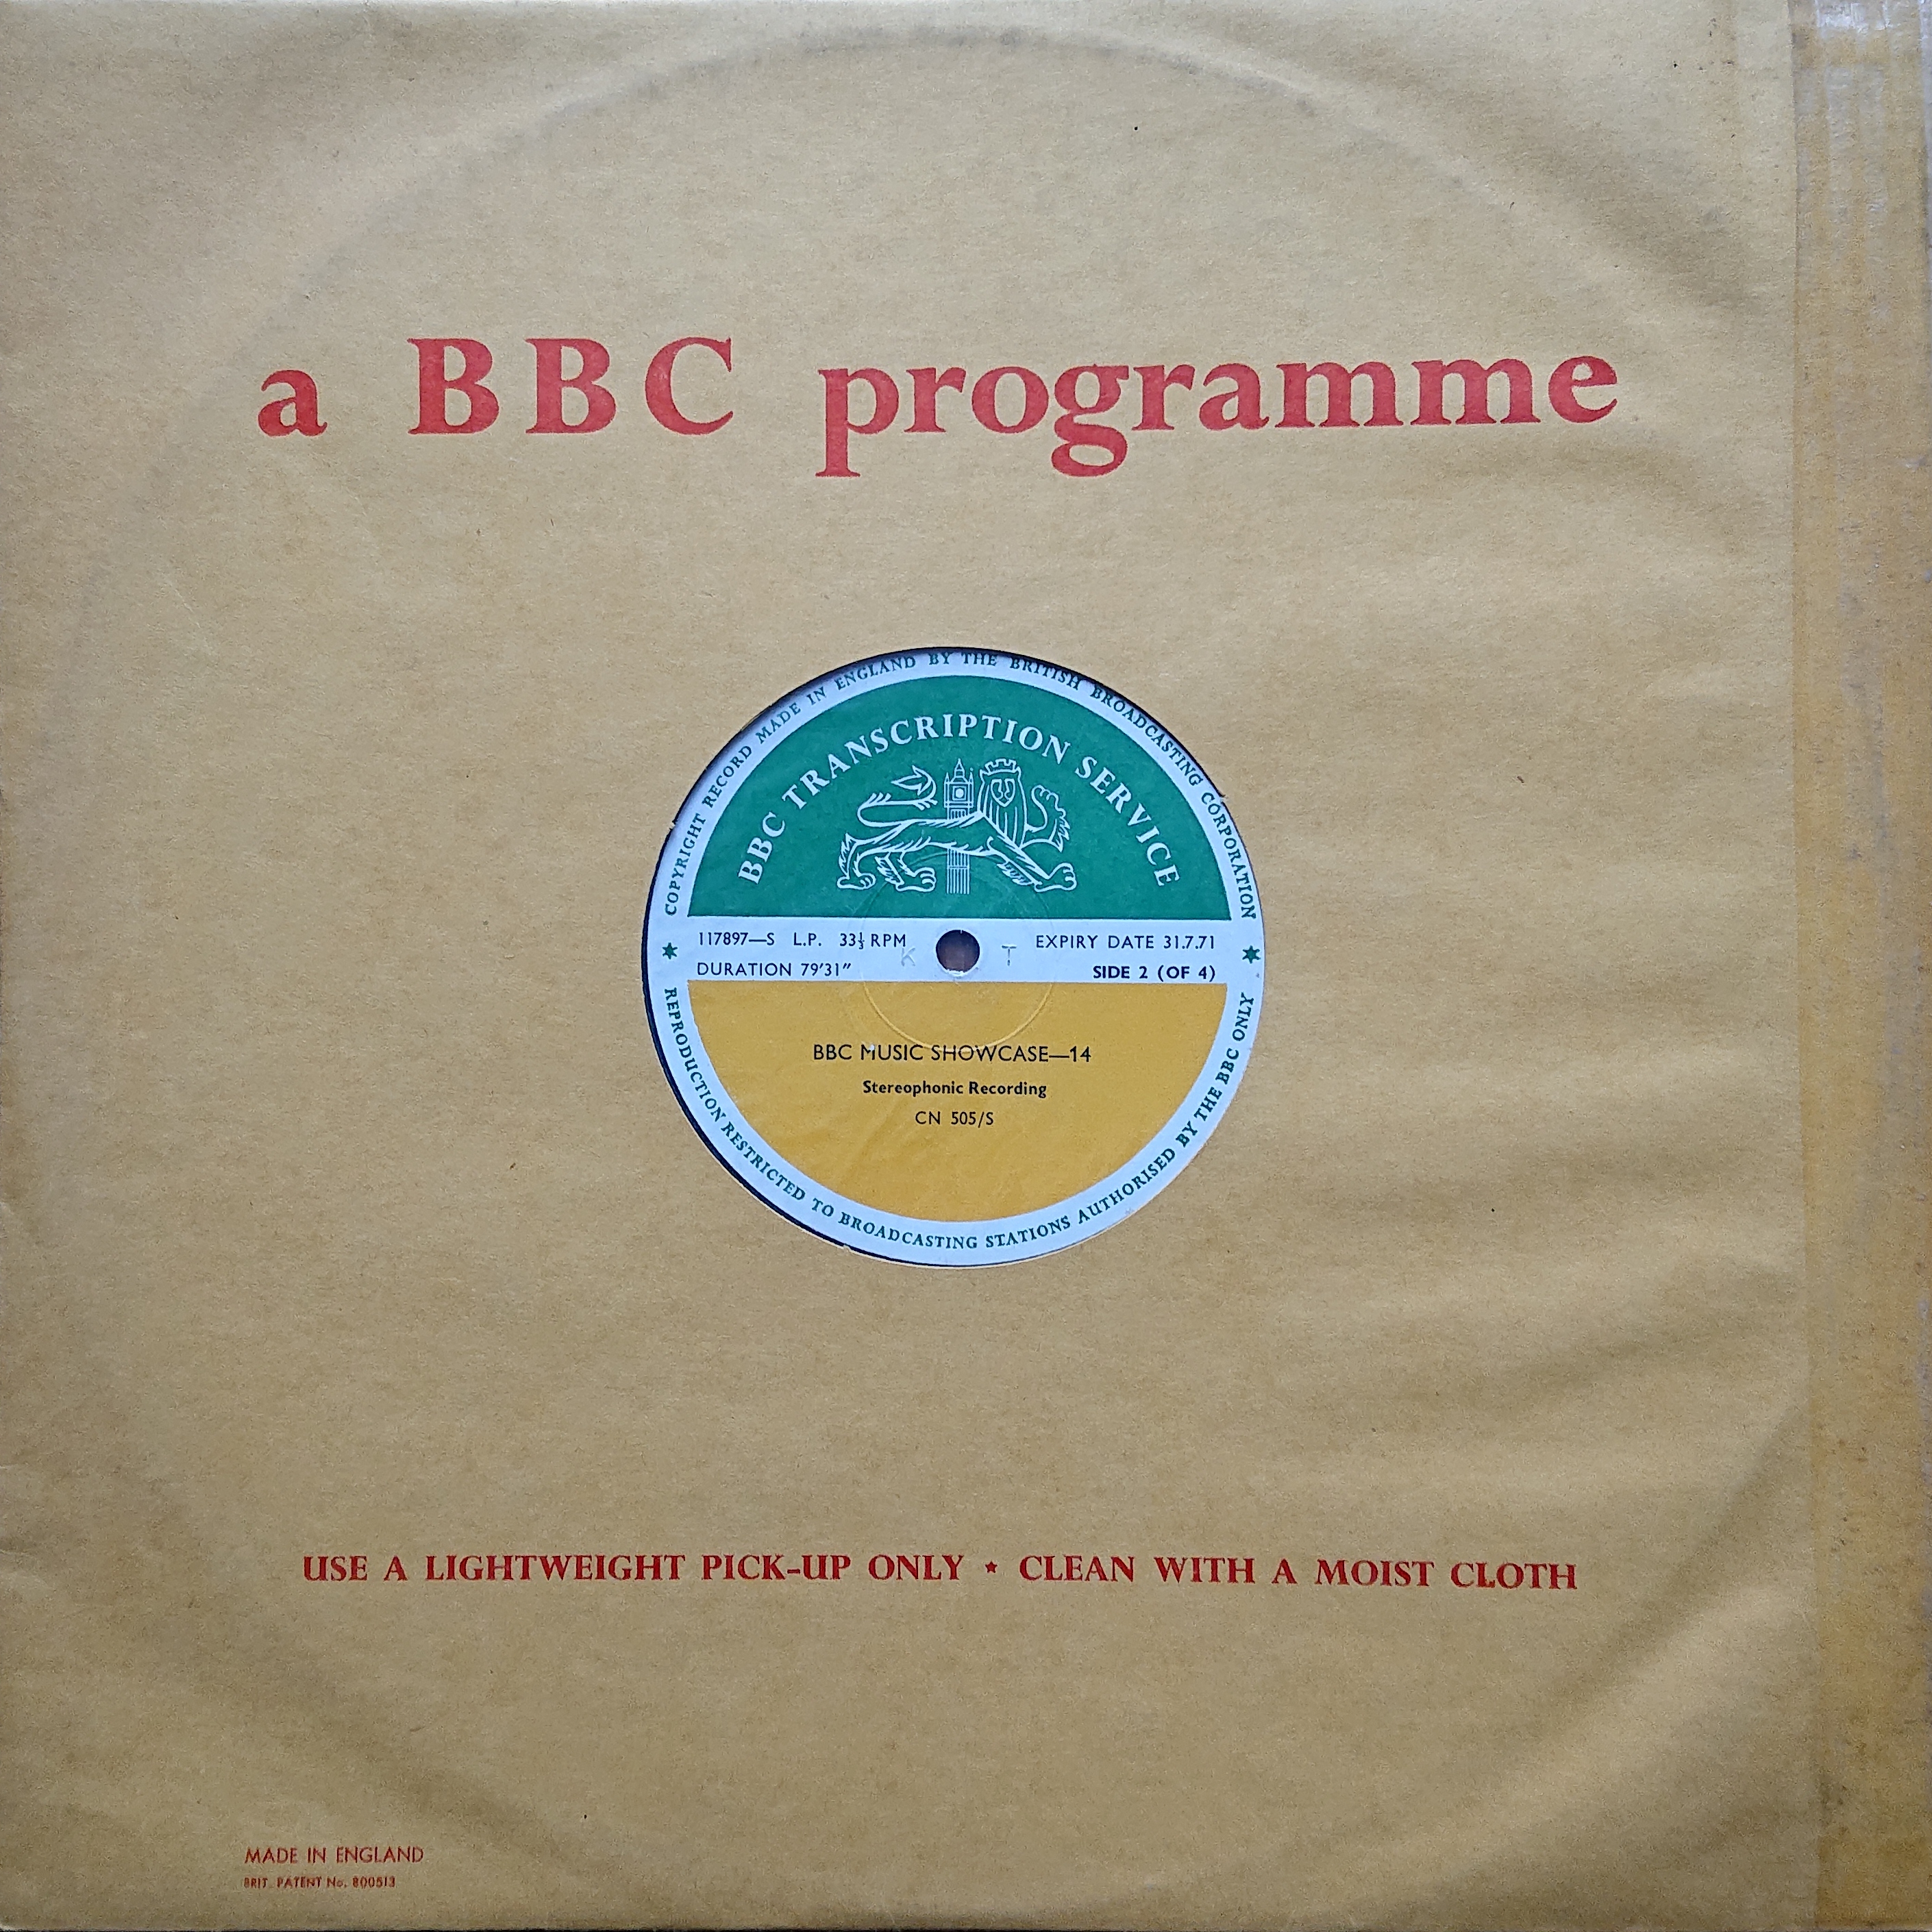 Picture of CN 505 S 28 BBC music showcase - 14 (Sides 2 & 4) by artist Various from the BBC albums - Records and Tapes library